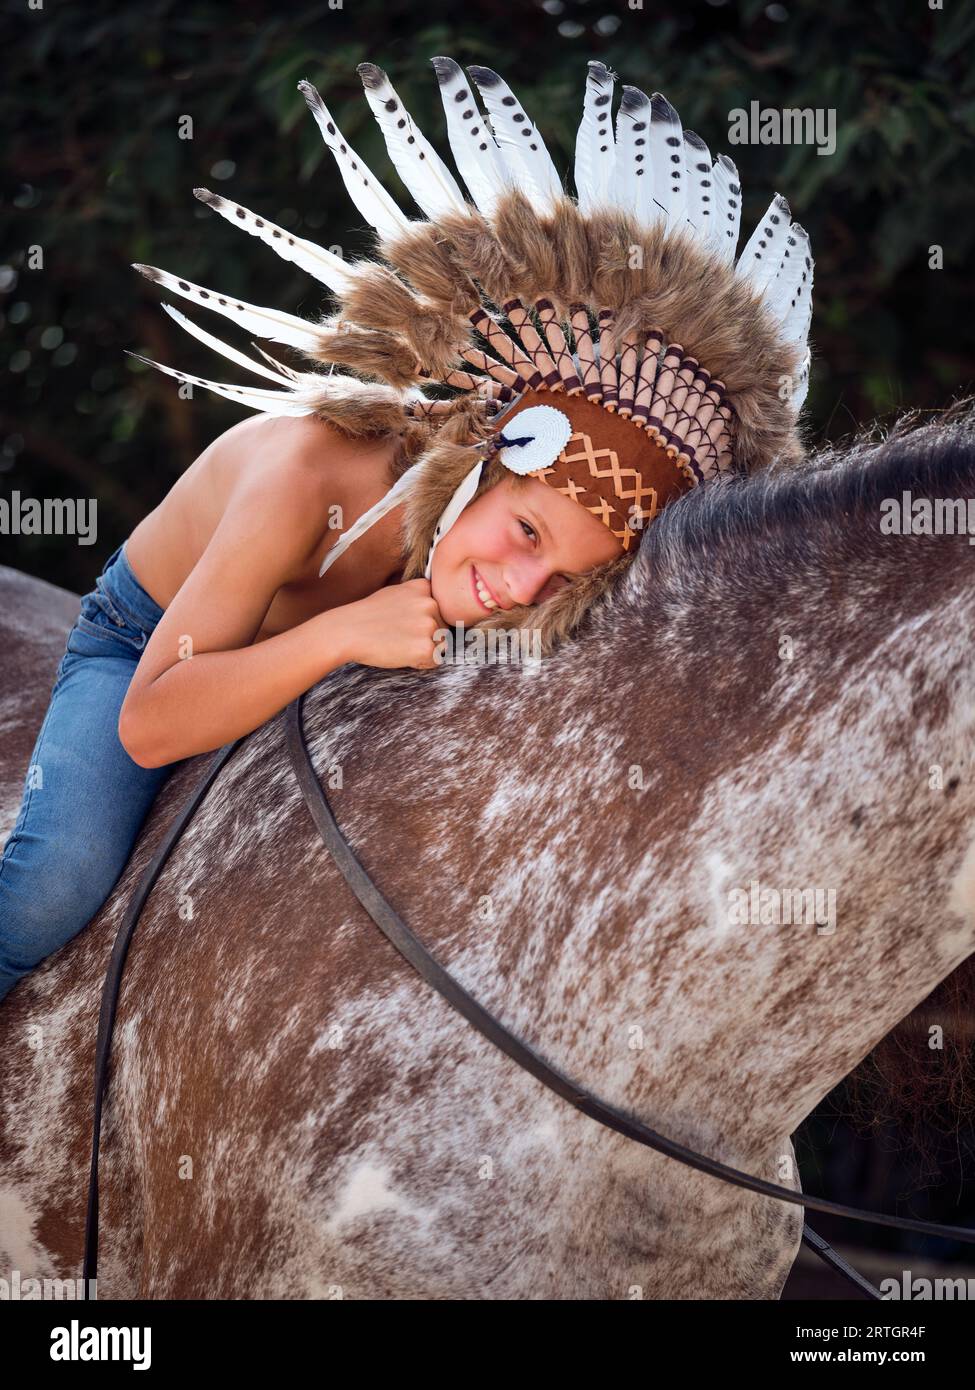 Young boy wearing traditional headwear looking at camera while sitting and hugging horse with reins Stock Photo